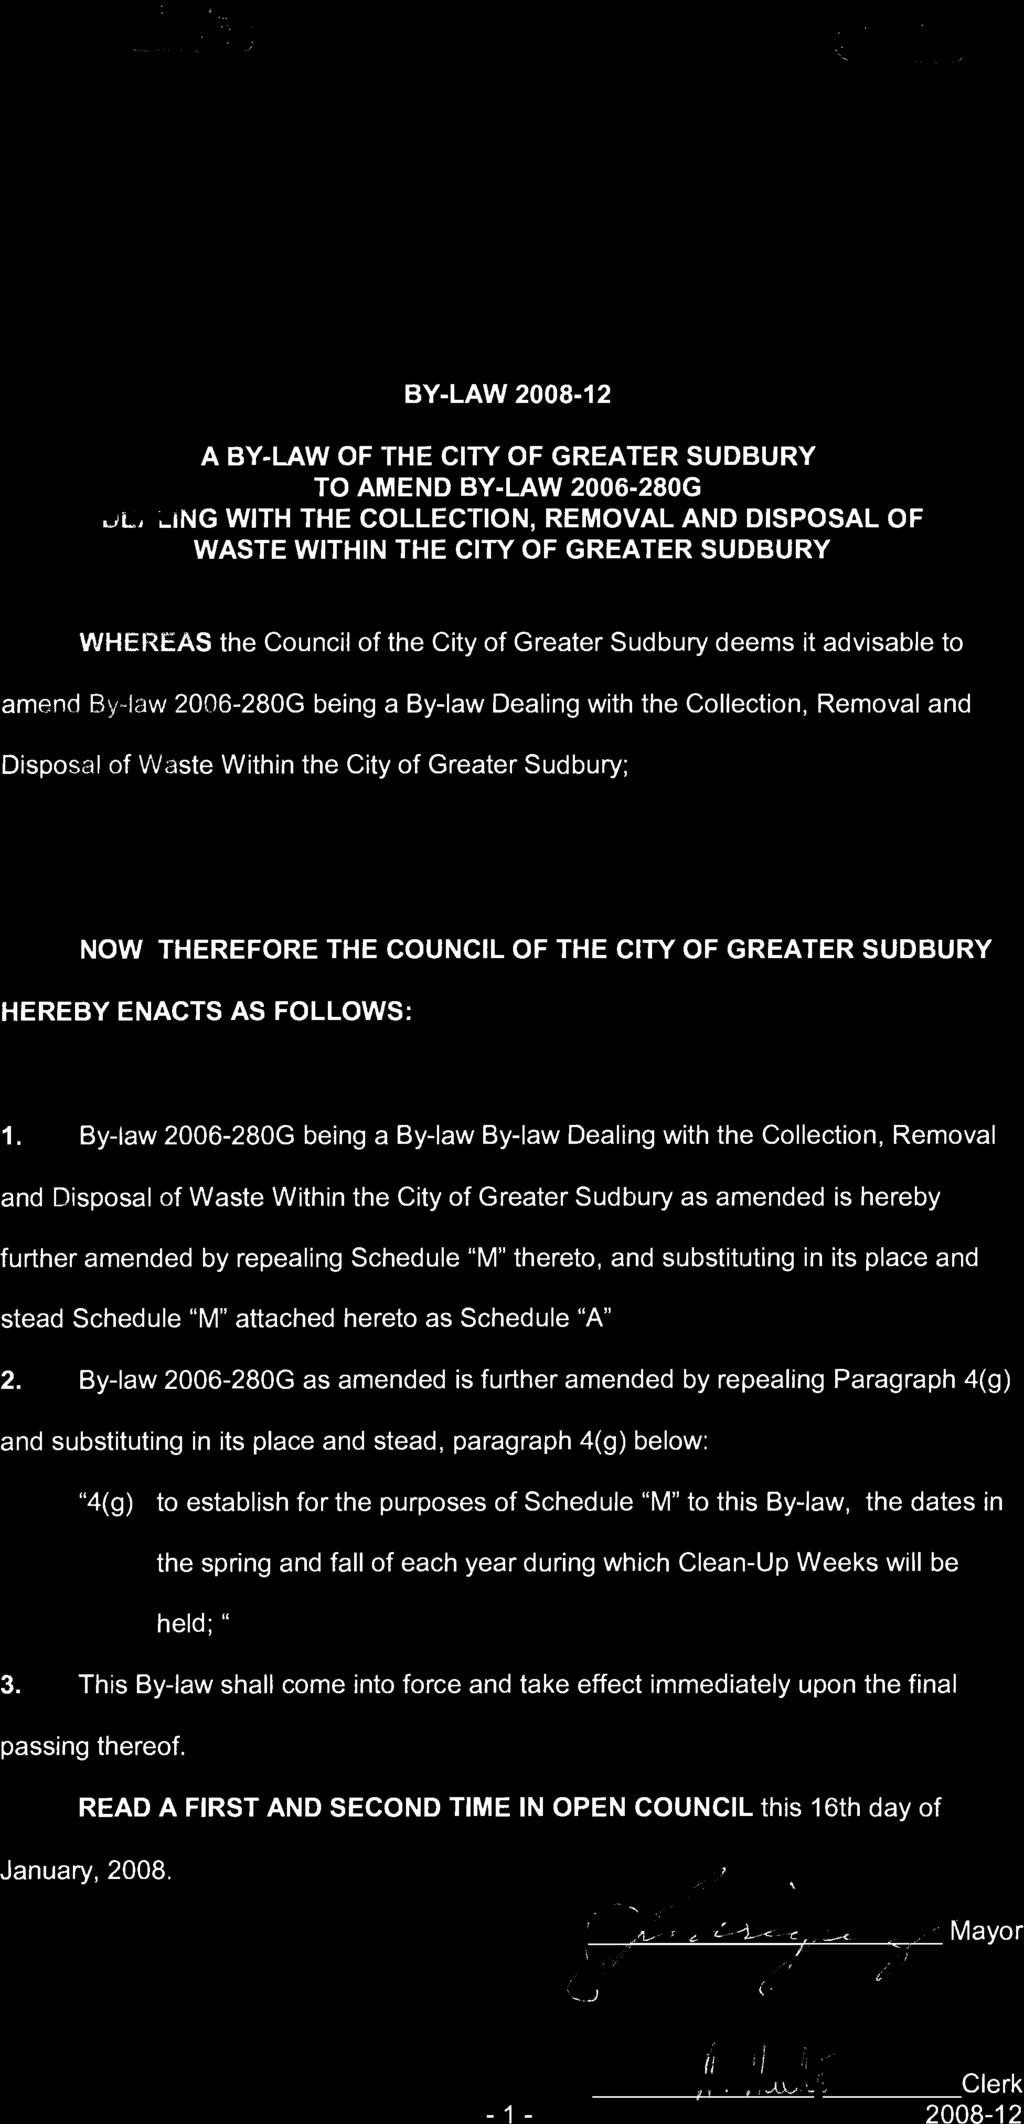 -_../ BY-LAW 2008-12 A BY-LAW OF THE CITY OF GREATER SUDBURY o LING WITH THE COLLECTION, REMOVAL AND DISPOSAL OF WHEREAS the Council of the City of Greater Sudbury deems it advisable to amend By-law